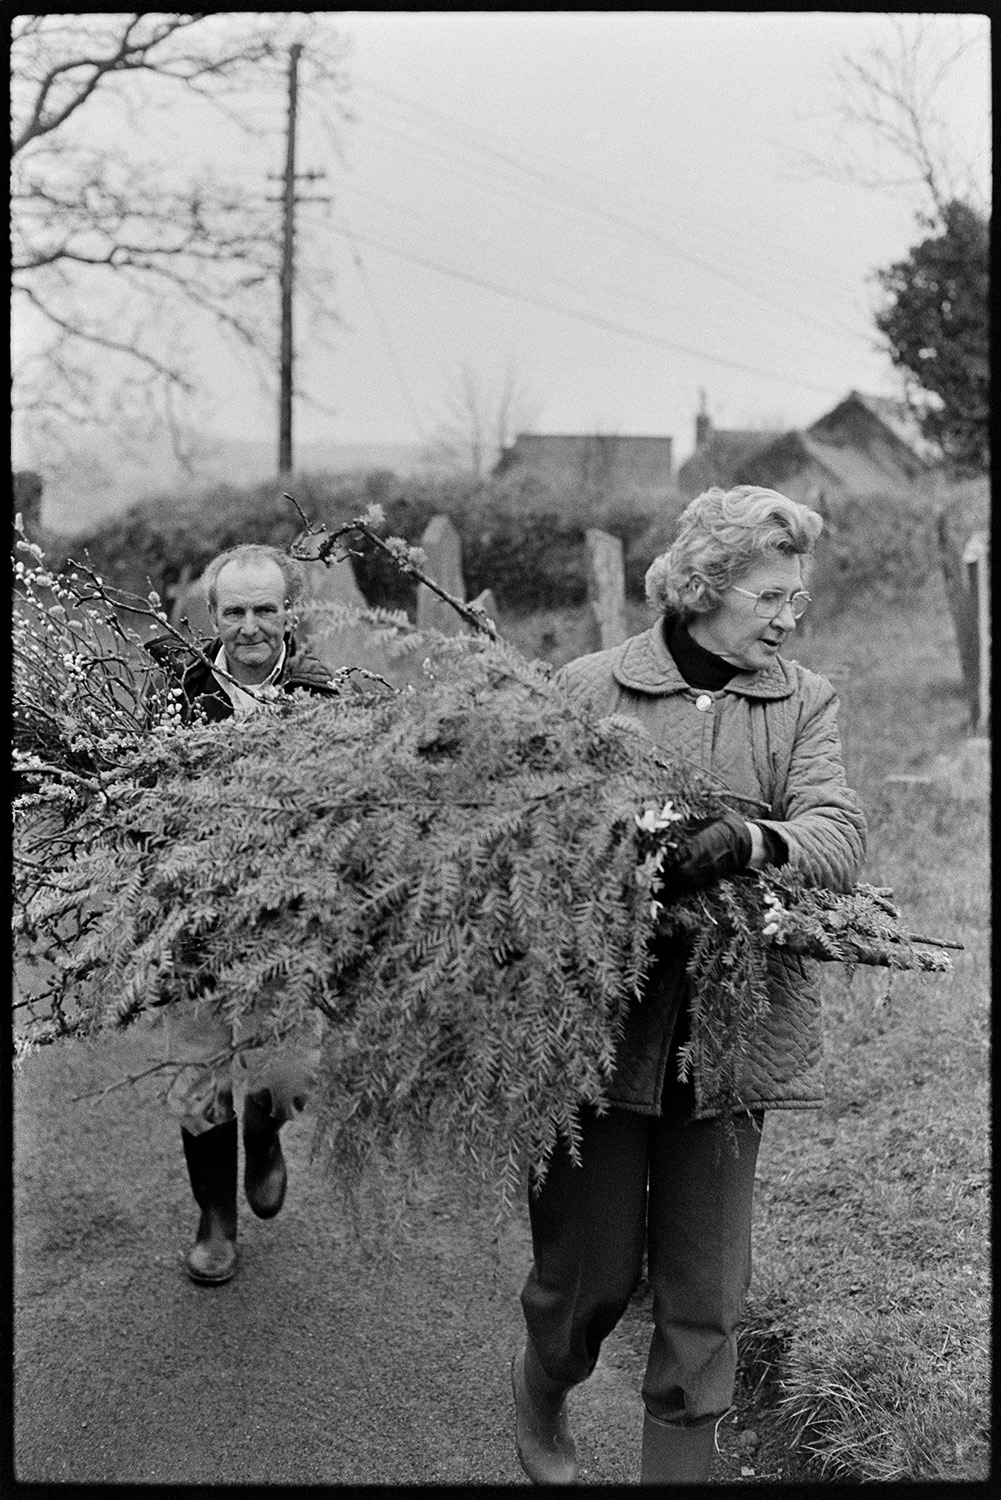 Couple collecting branches and Pussy Willow for Easter decorations in church. 
[Beatrice Nancekivell and Tom Nancekivell carrying branches of pussy willow and trees along the church path at Dolton Church, to use for Easter decorations in the Church. Gravestones can be seen in the background.]